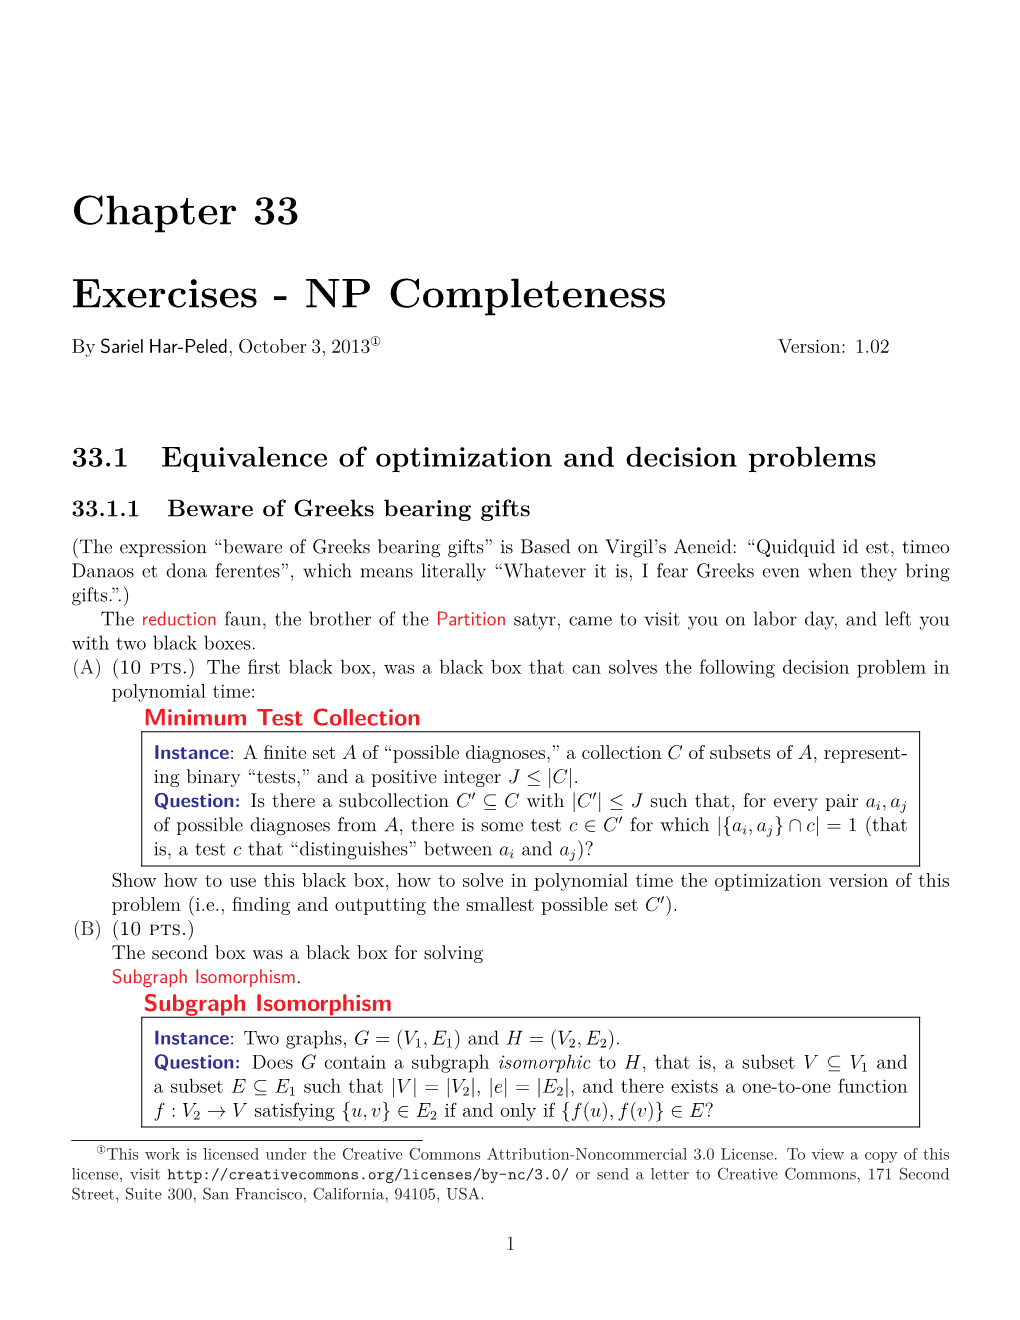 Chapter 33 Exercises